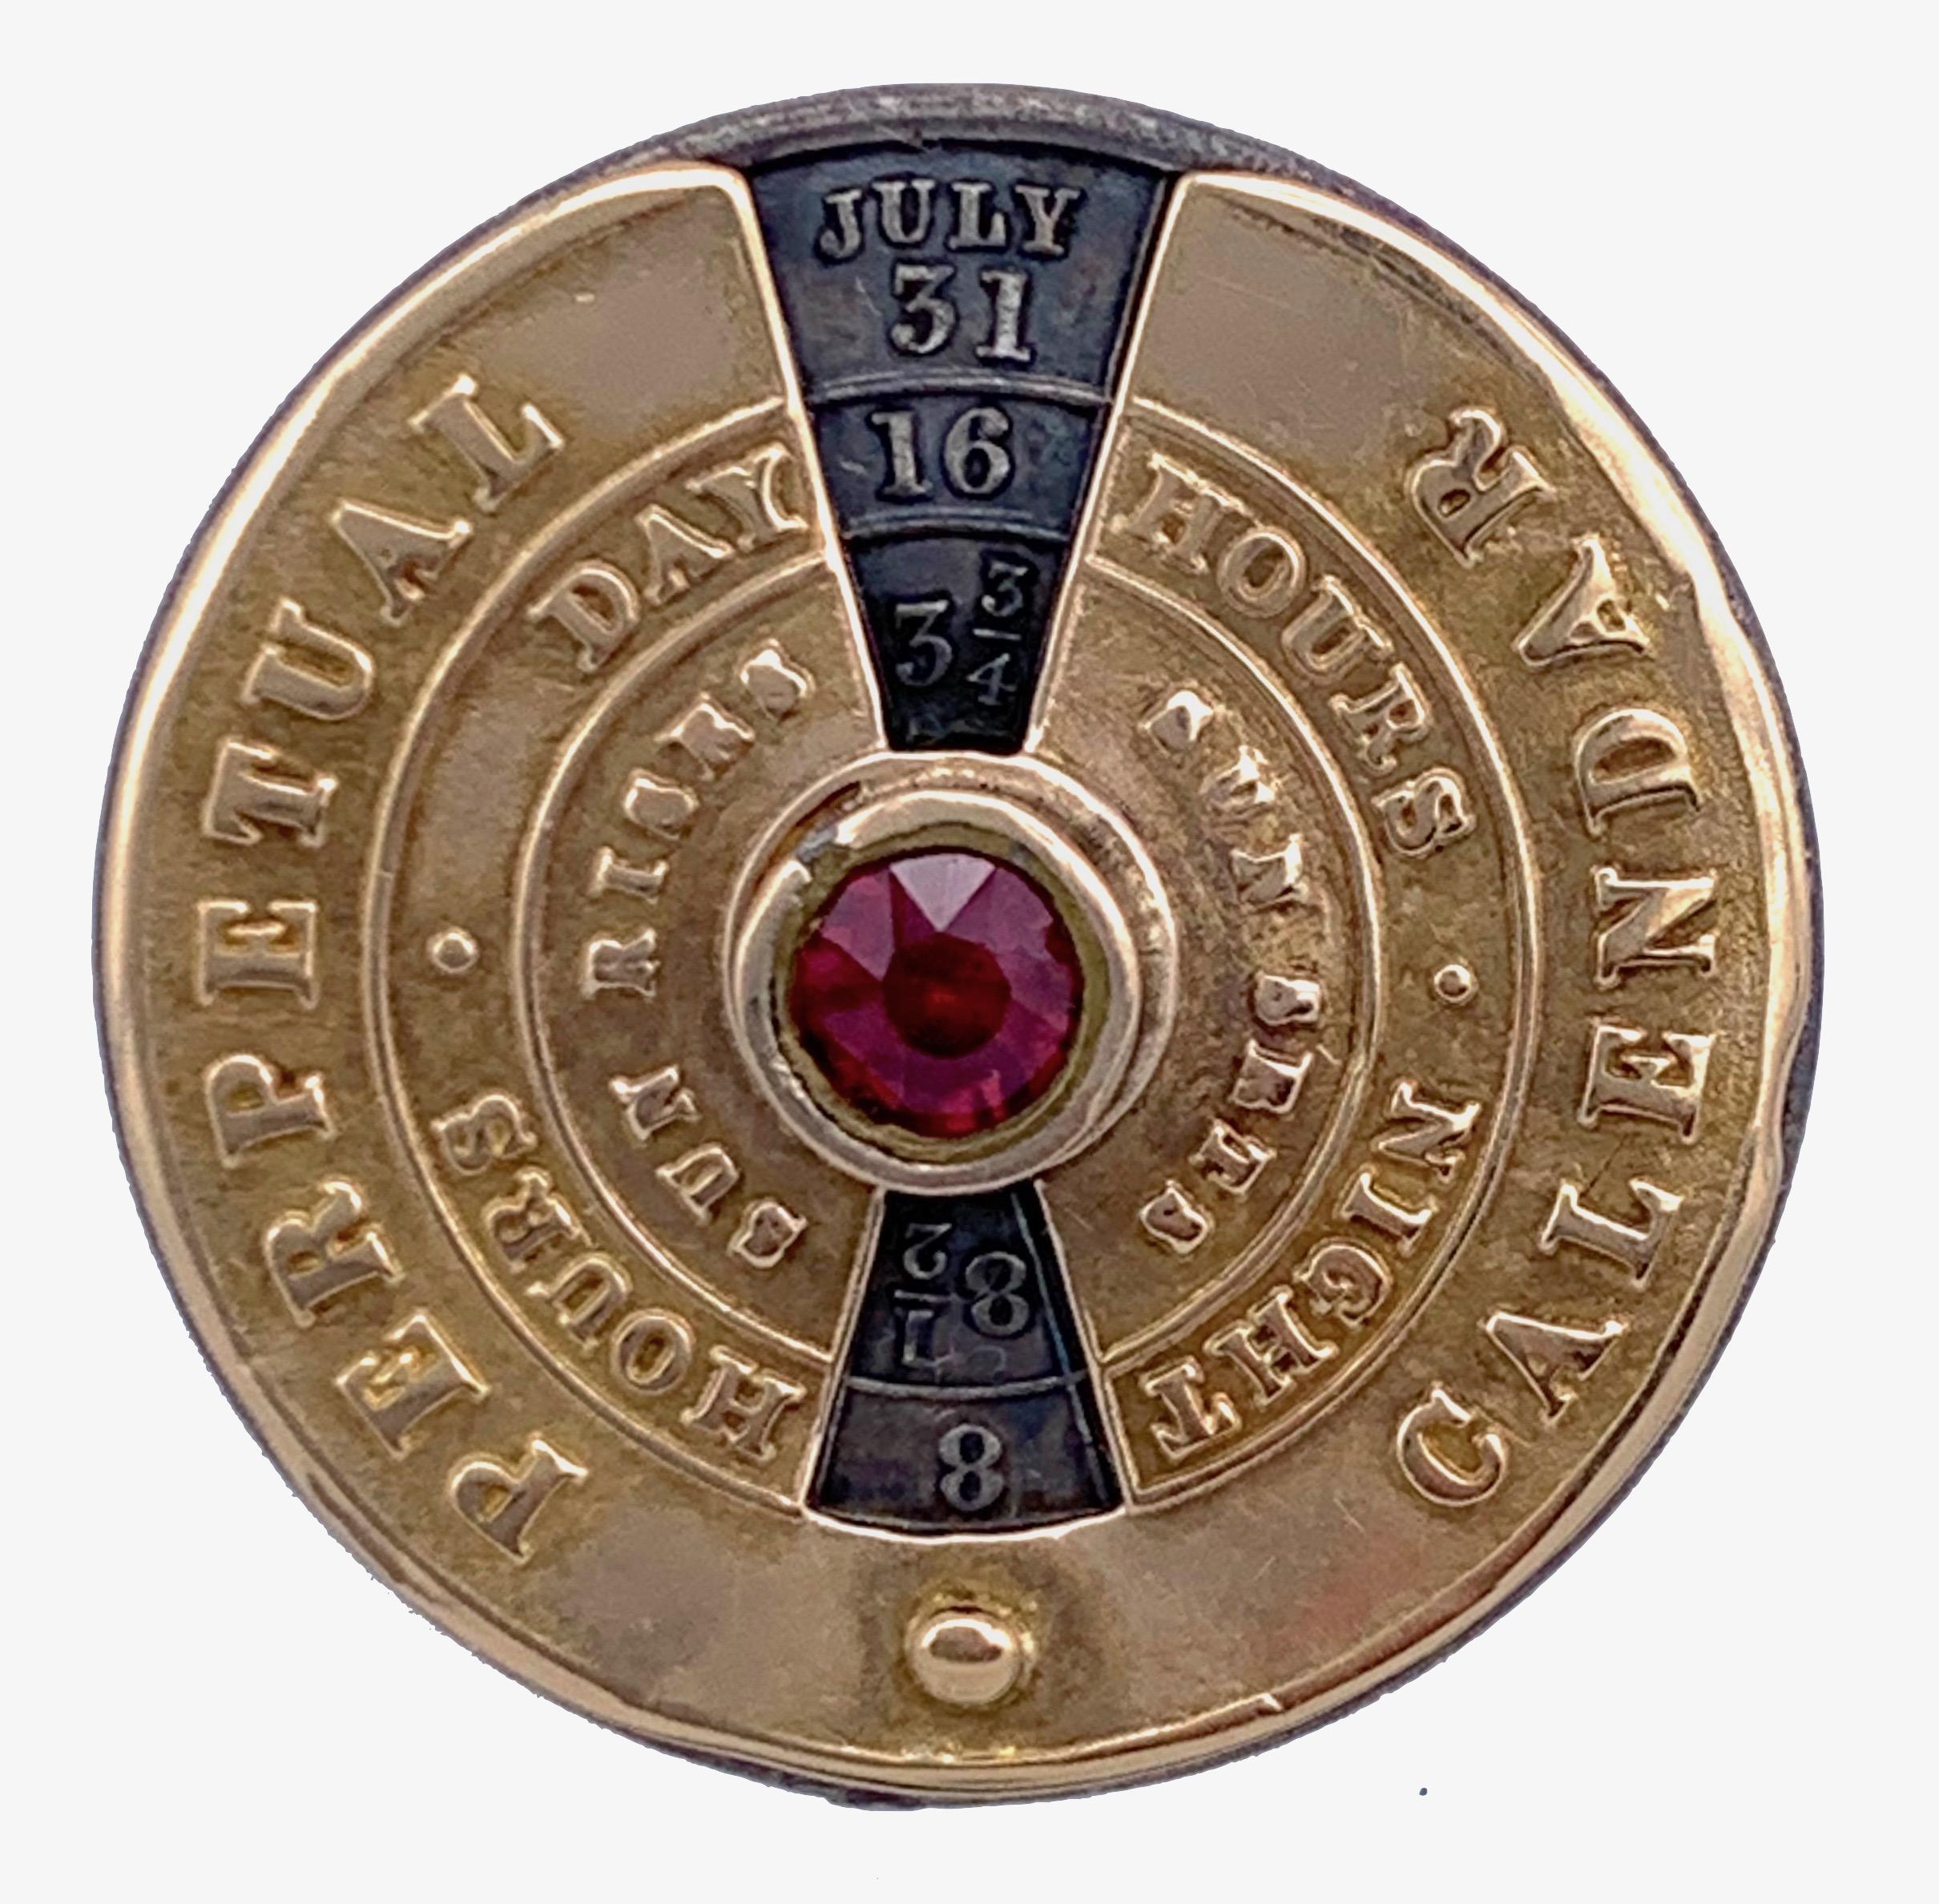 Highly unusual and rare perpetual calendar made out of gold and silver. The outer golden case and the rotating silver disk are held in place by a gold rivet set with a red glass stone. The back of the calendar shows the day of the month and the